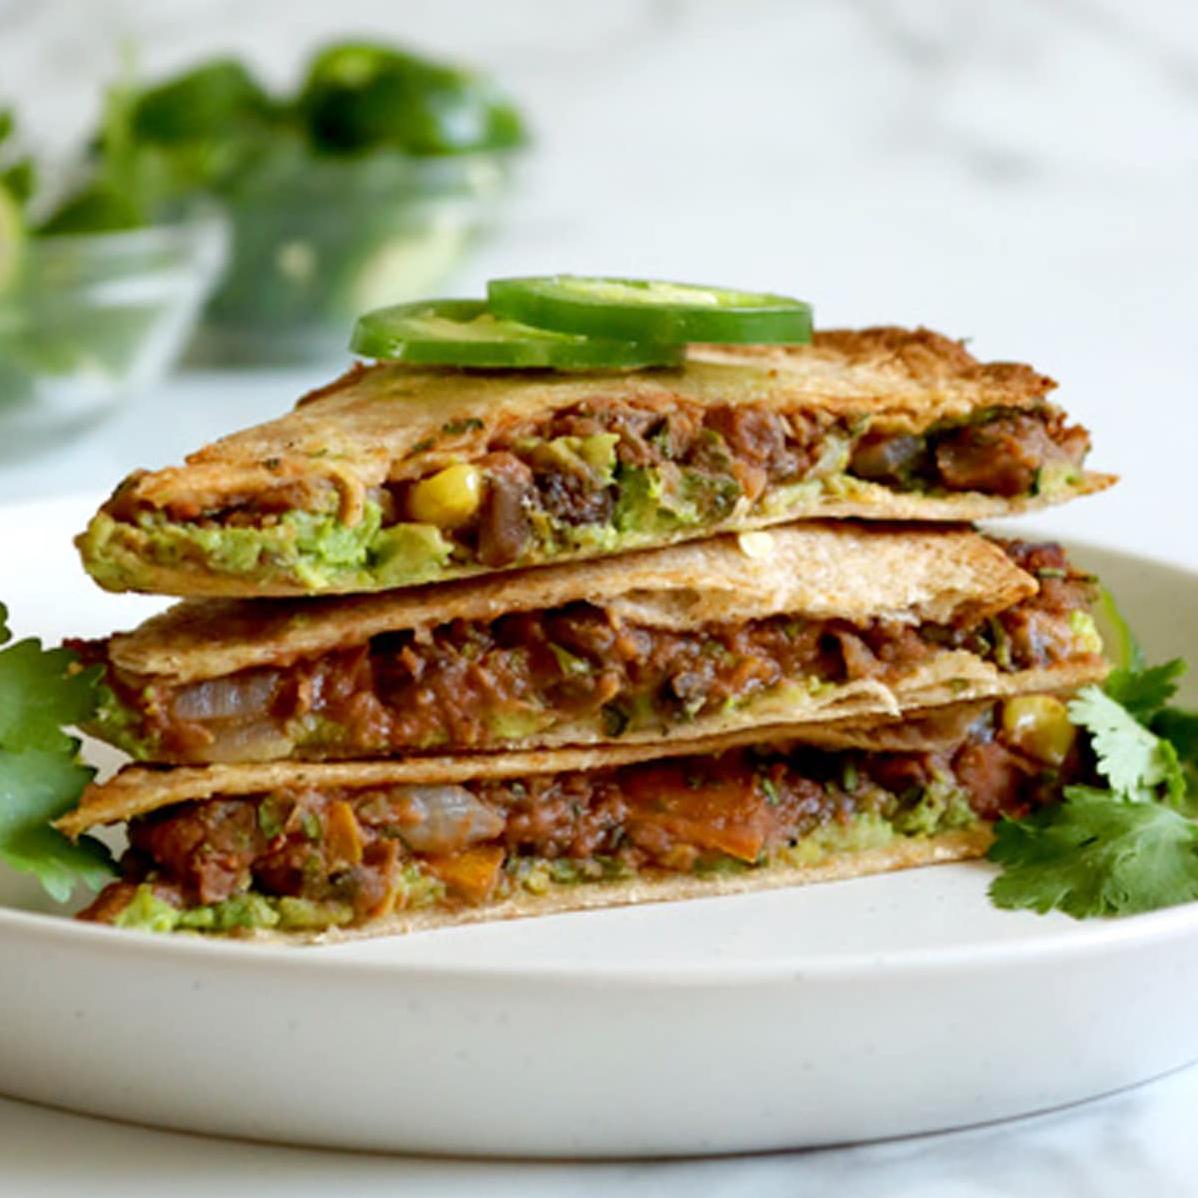  For a dairy-free twist on a classic, try these vegan quesadillas!